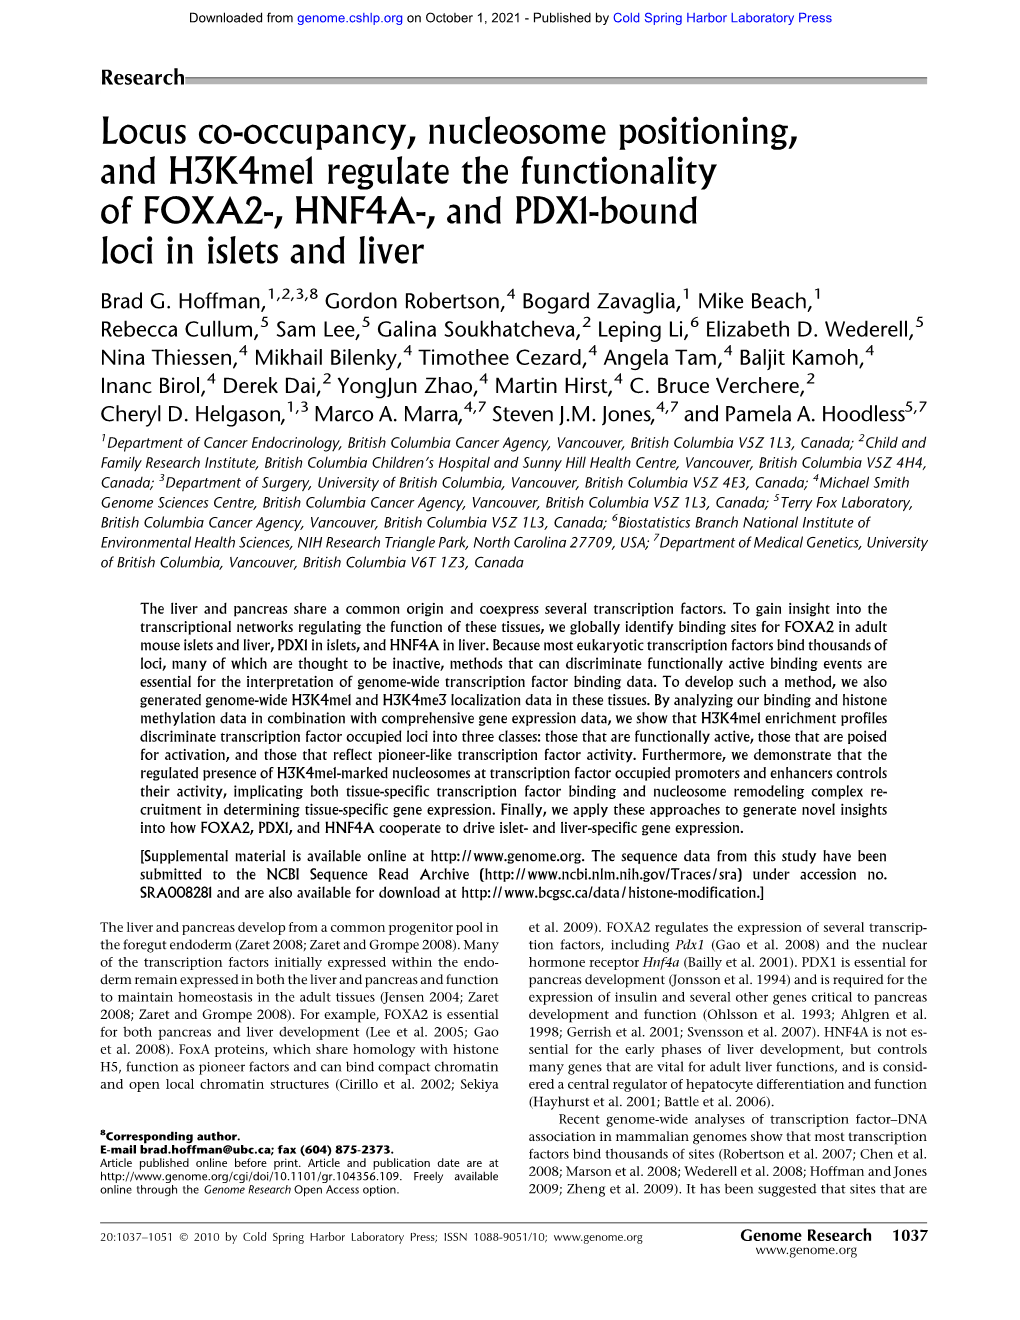 Locus Co-Occupancy, Nucleosome Positioning, and H3k4me1 Regulate the Functionality of FOXA2-, HNF4A-, and PDX1-Bound Loci in Islets and Liver